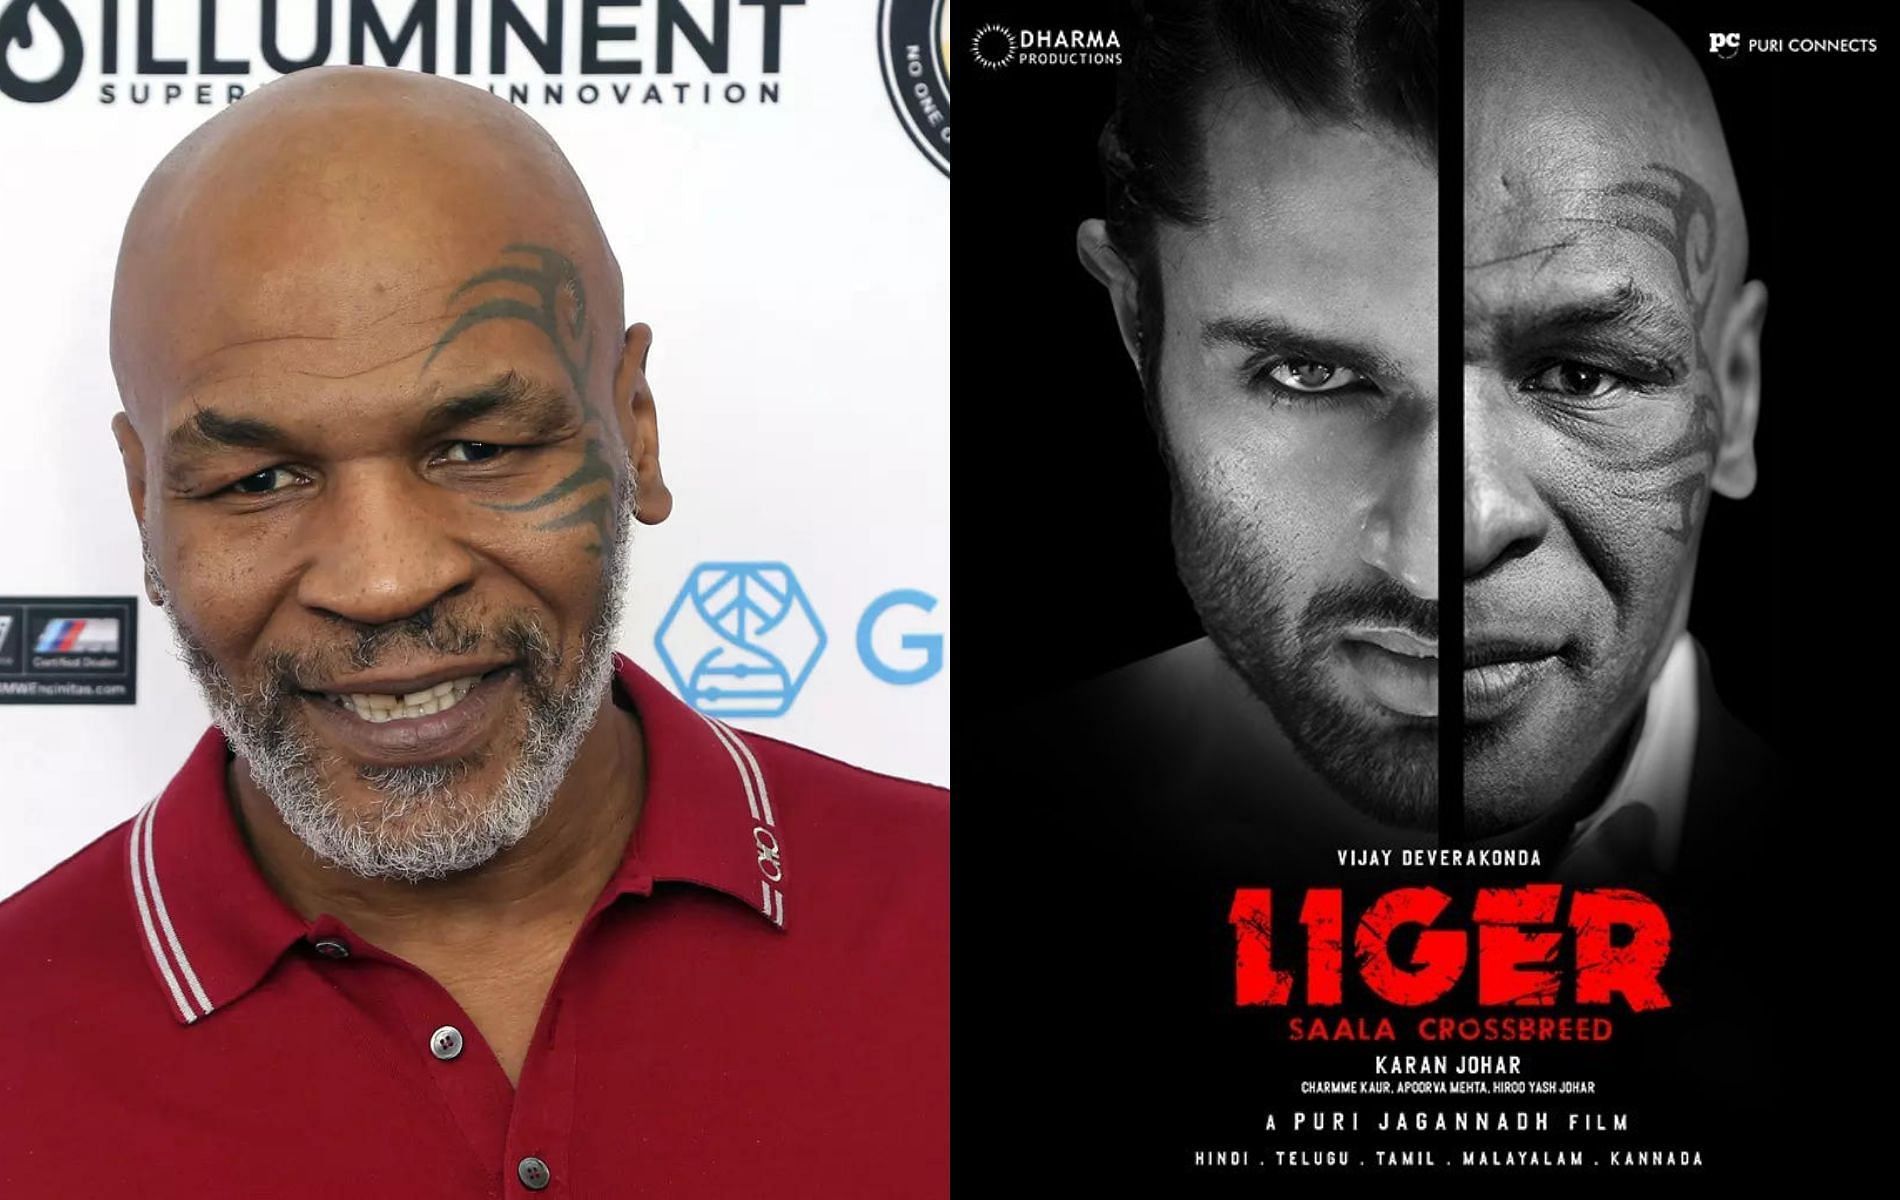 Mike Tyson (left) and Liger poster (right)